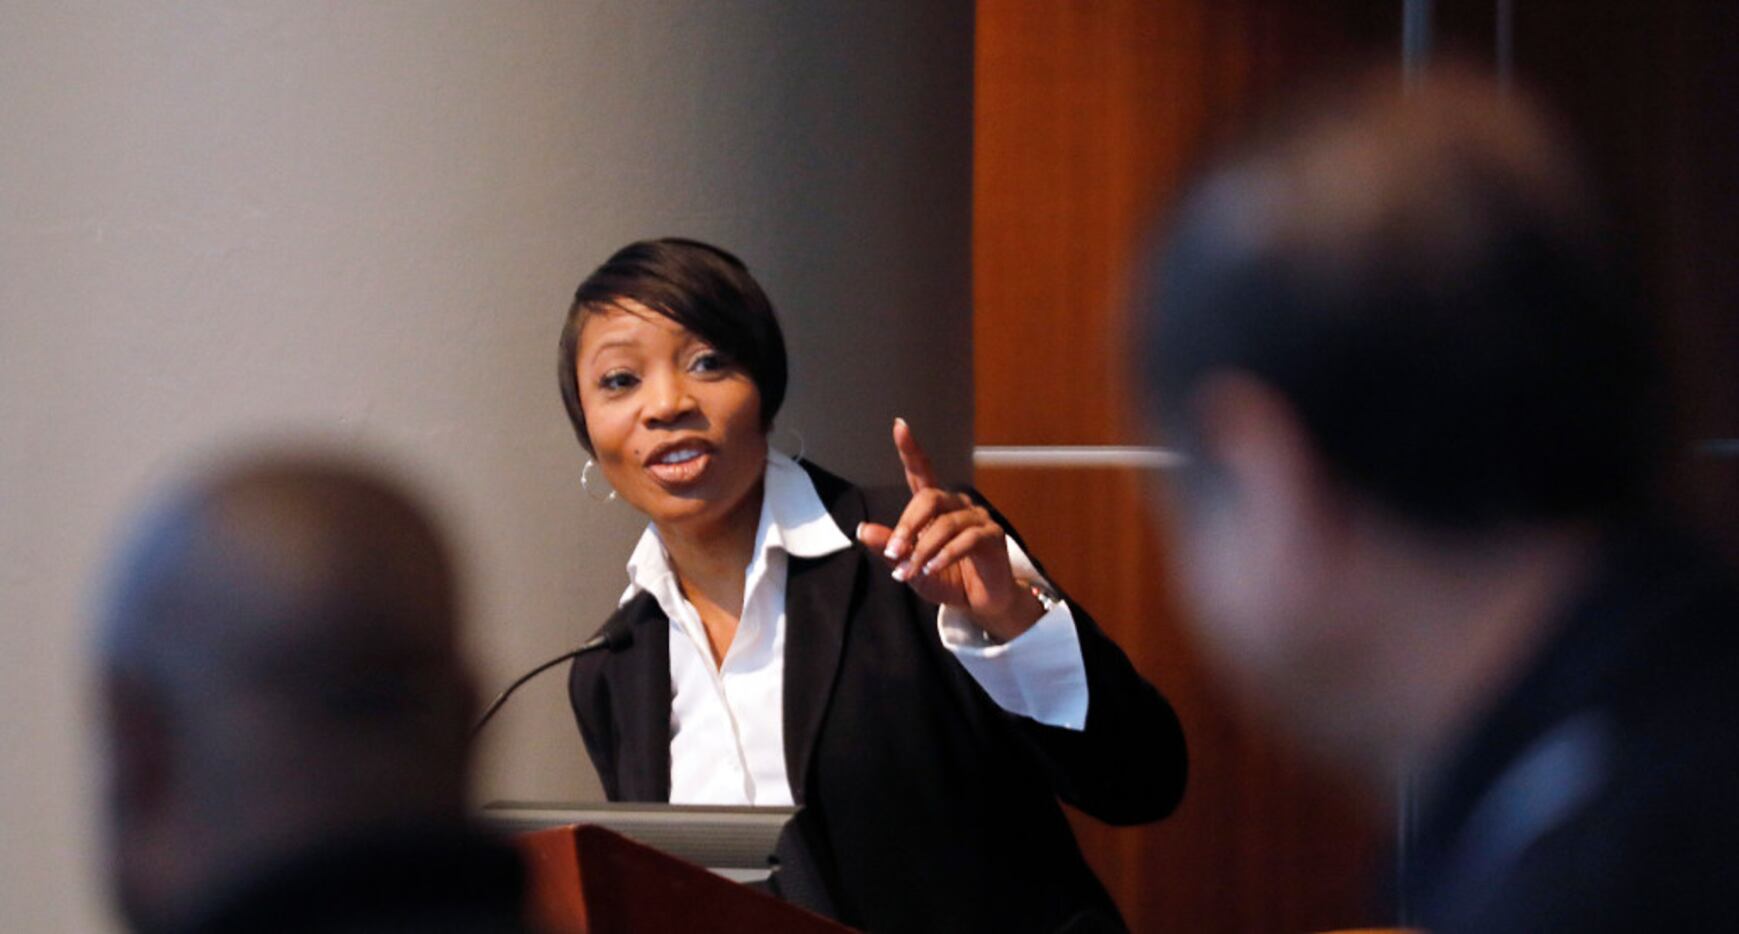 Dallas Police Chief U. Renee Hall address police applicants at the department's latest...